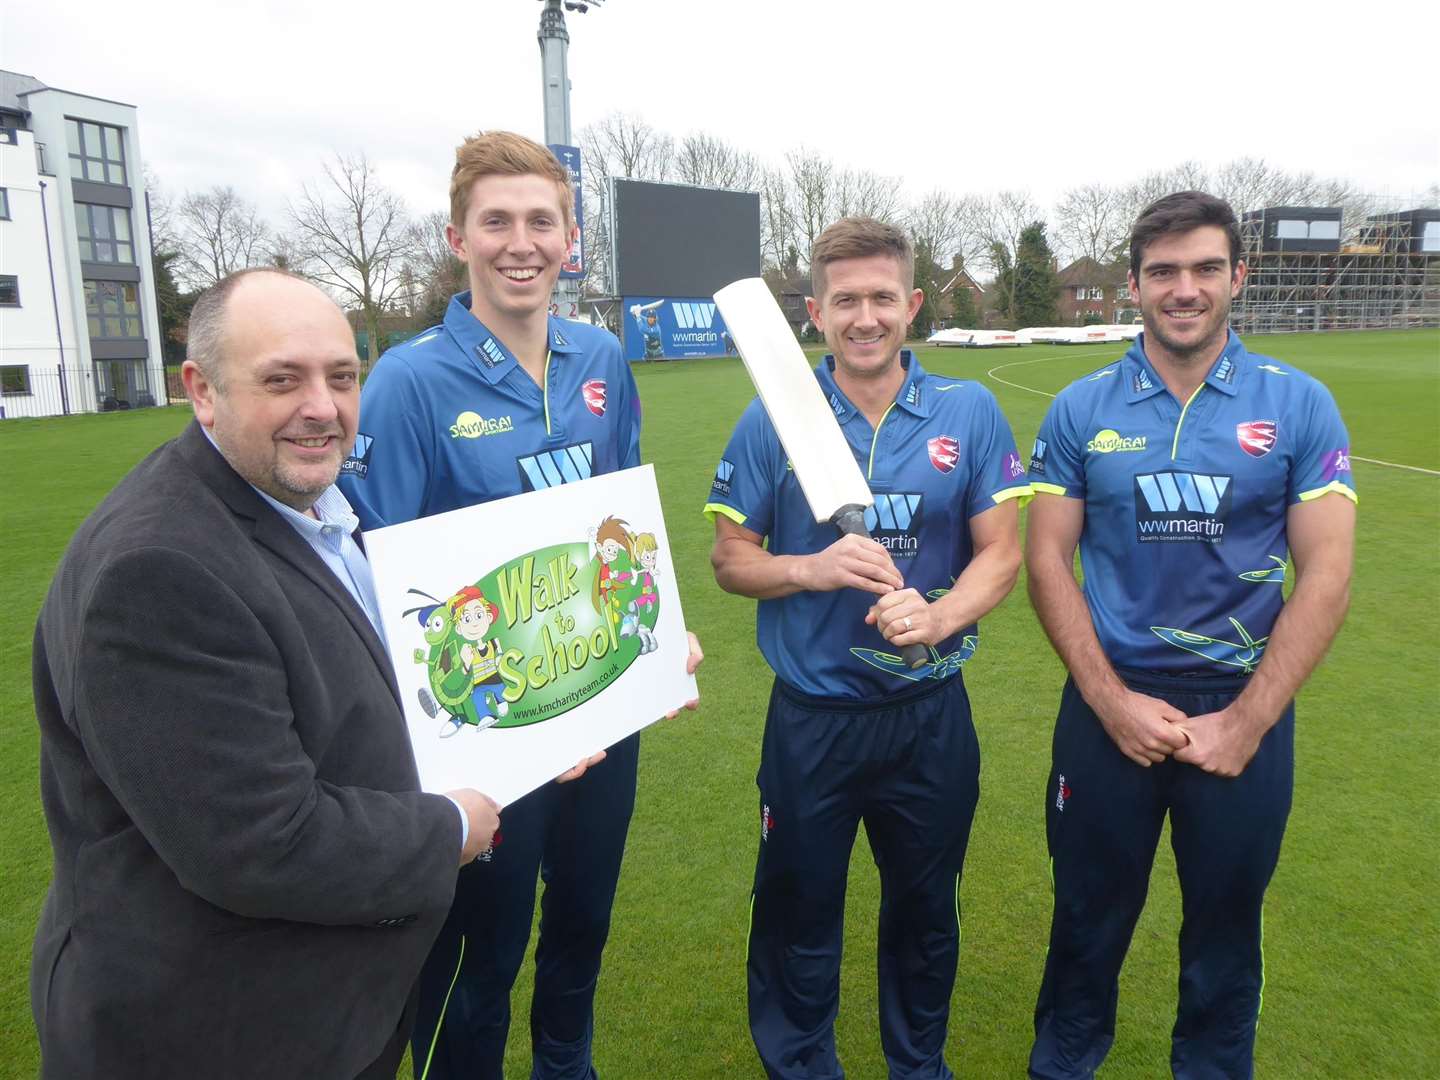 Neil Peck, director of WW Martin, joins Kent cricketers Zak Crawley, Joe Denly and Grant Stewart to promote the walk to school campaign. (1500363)